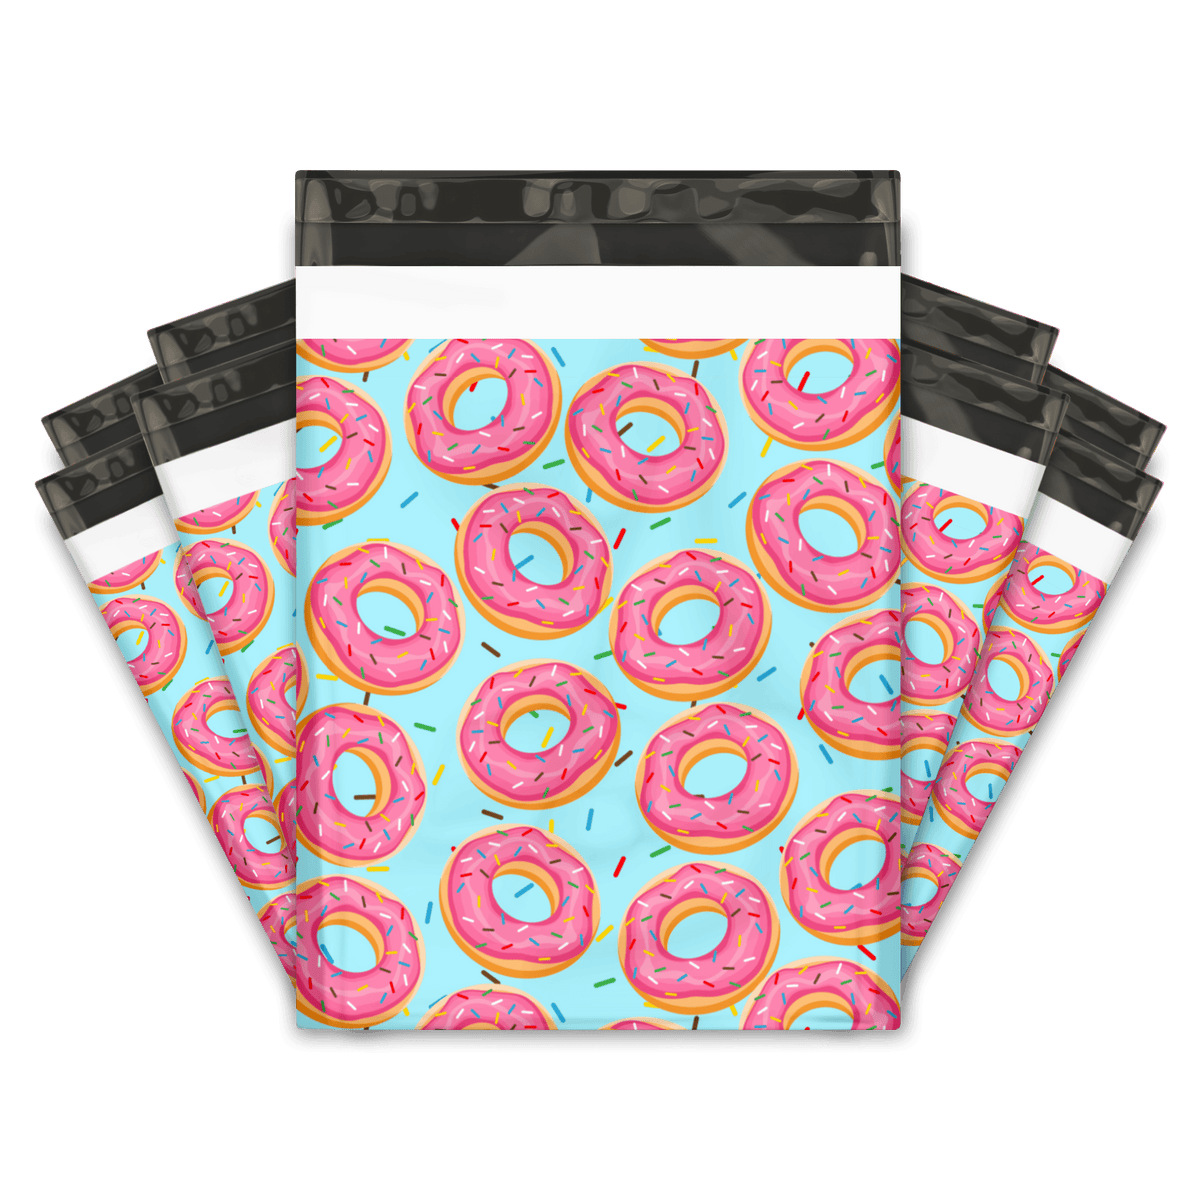 Sprinkled Donuts Designer Poly Mailers Shipping Envelopes Premium Printed Bags